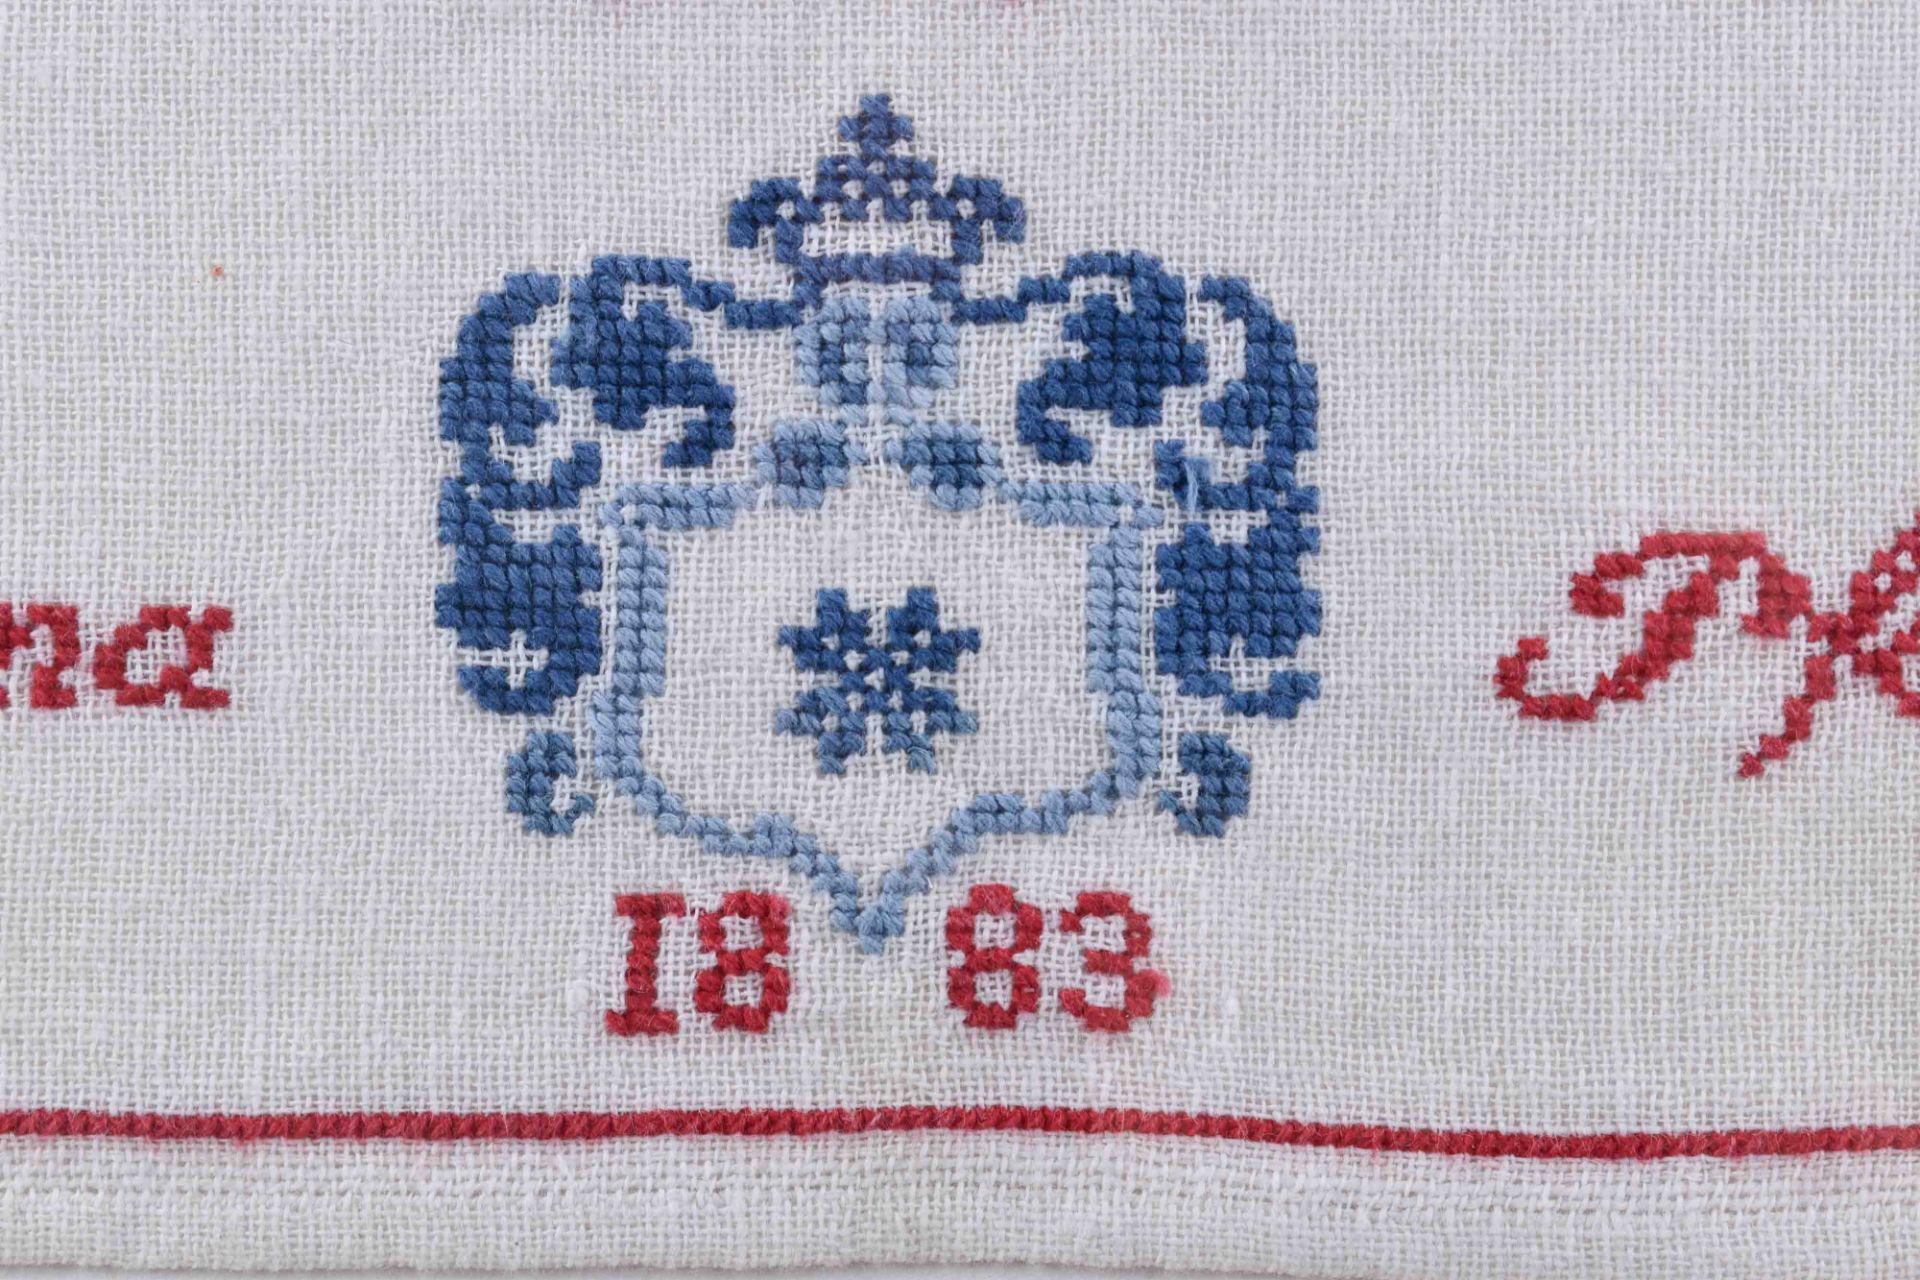 2 alphabetic embroideries from the 20svisible dimensions: 16.5 cm x 22.5 cm, visible dimensions 28 - Bild 6 aus 7